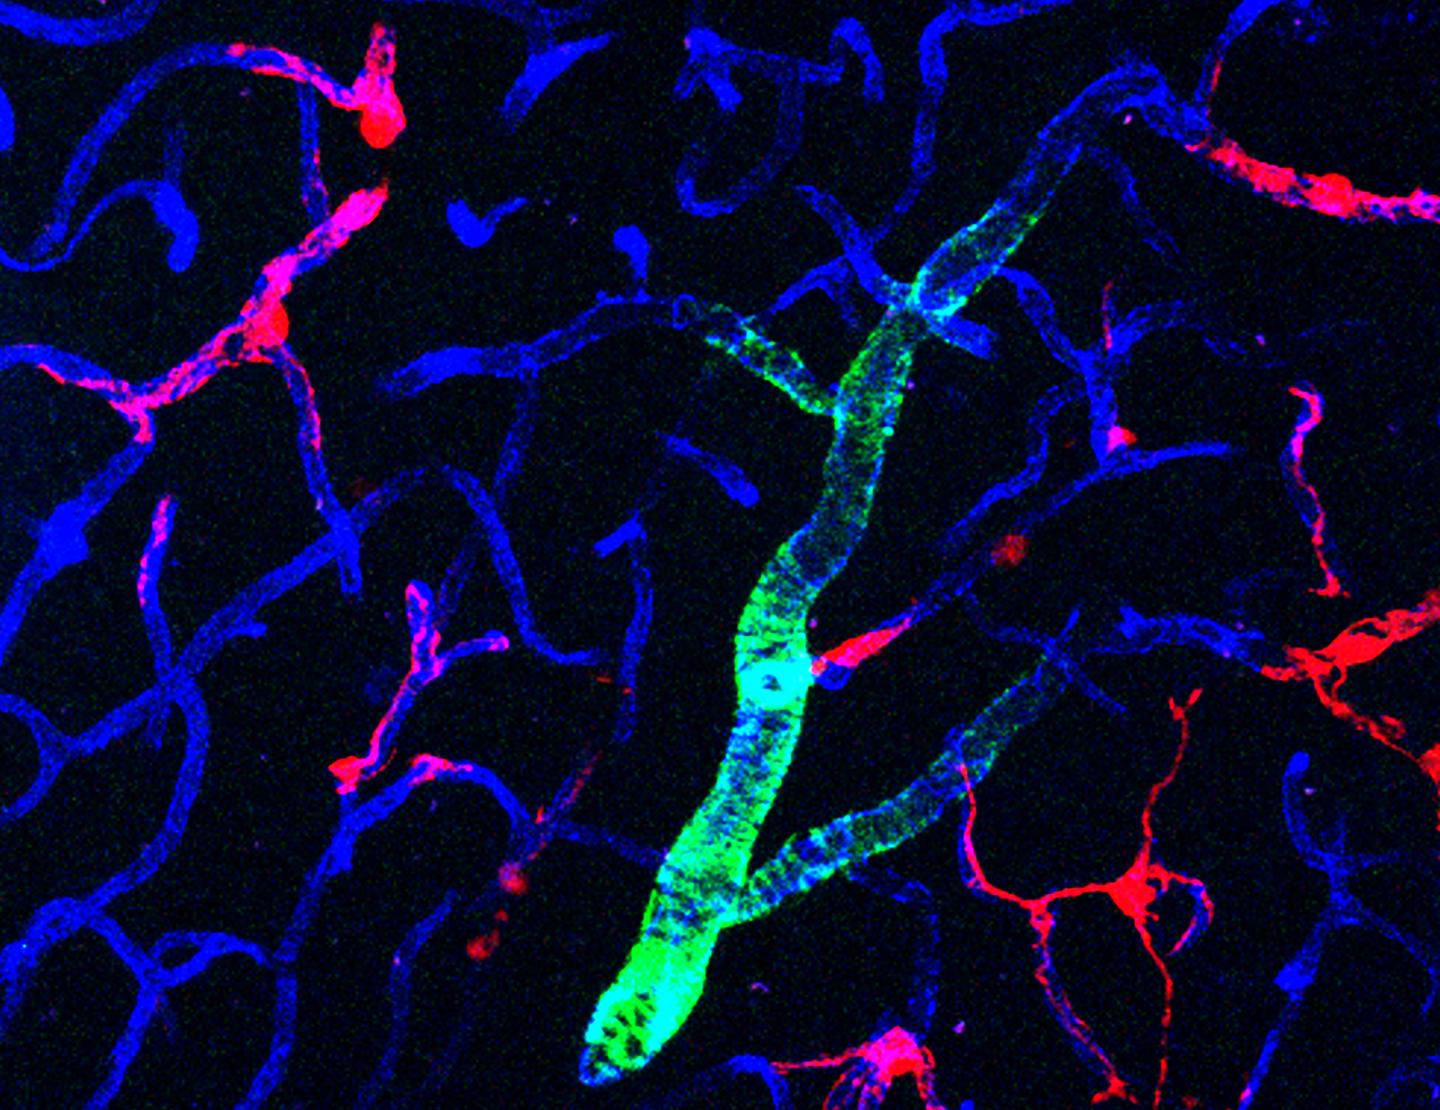 Pericytes in Capillaries in a Mouse Brain